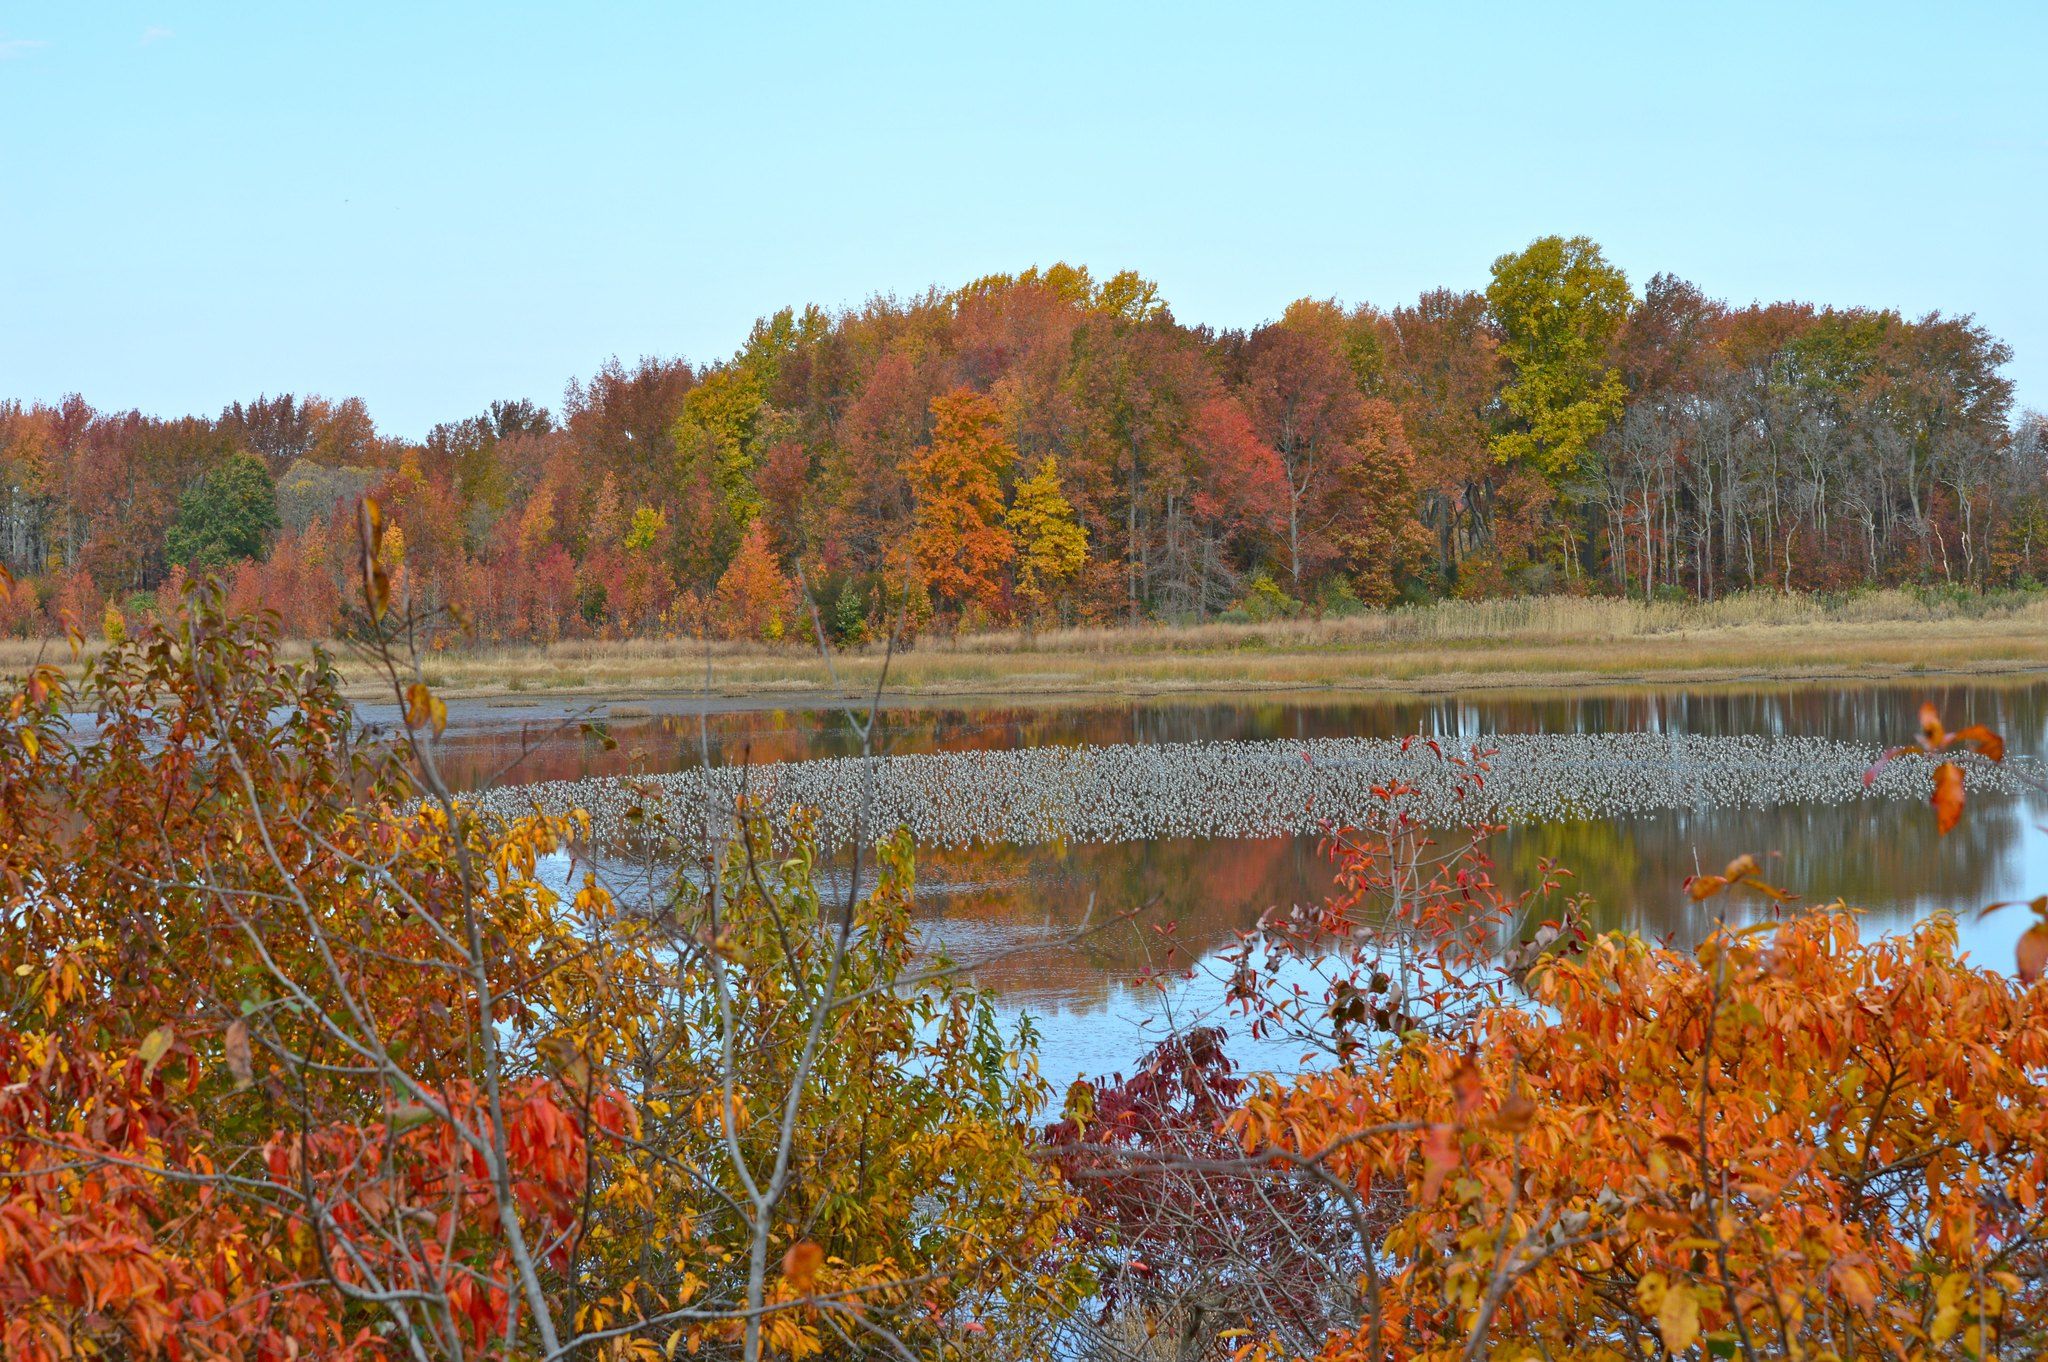 View from an observation tower at Bombay Hook National Wildlife refuge